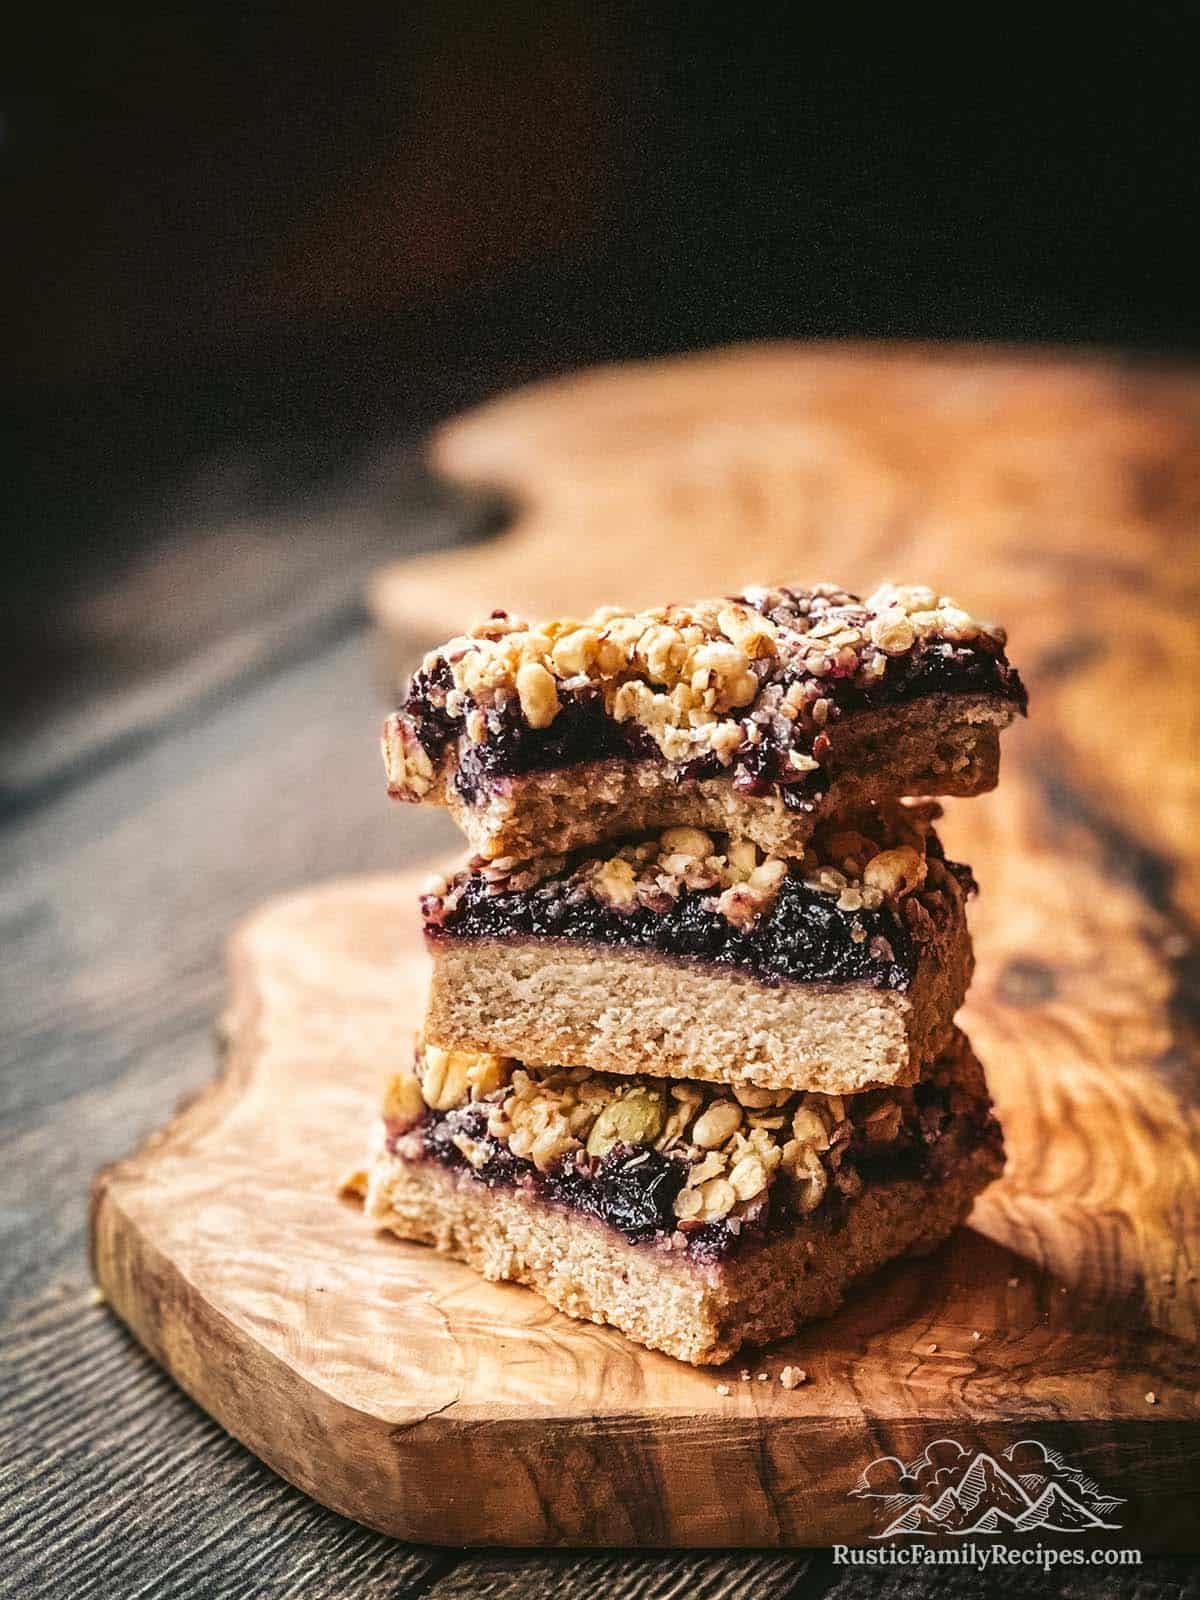 3 walnut blueberry shortbread cookie bars stacked on top of each other, a bite taken out of one.